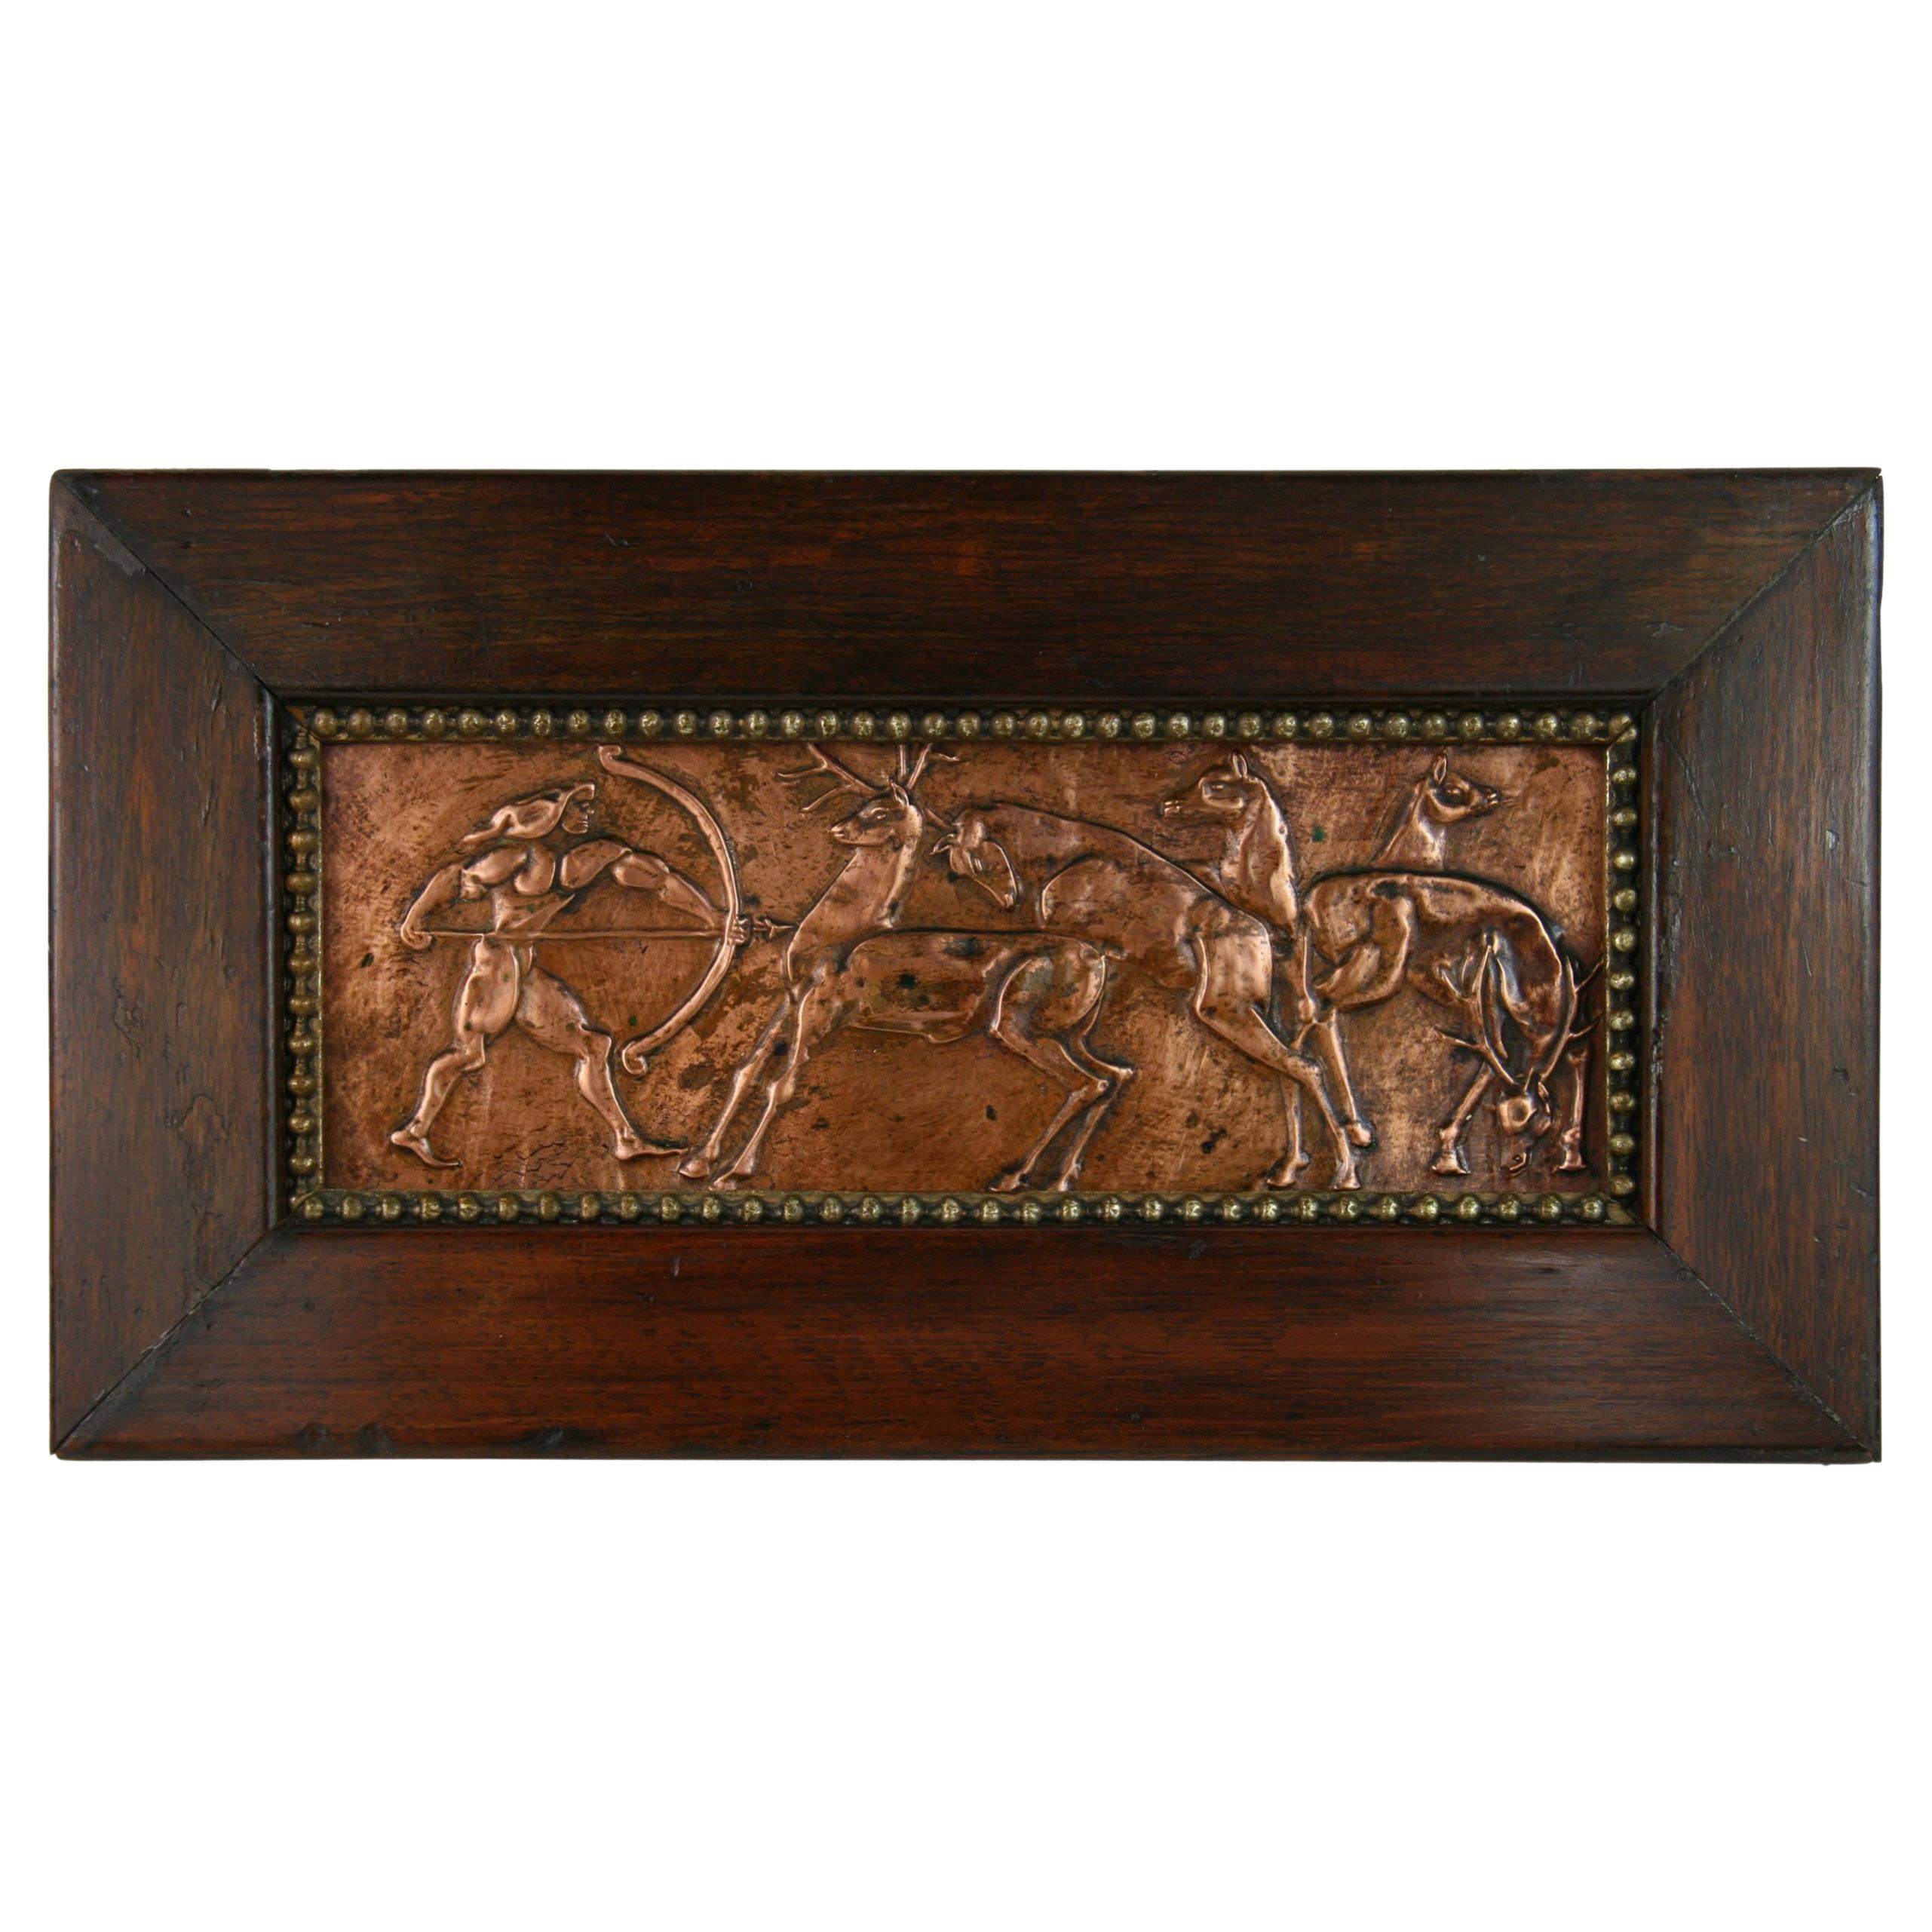 5-3627 hand hammered copper relief of mythical figure with bow and arrow.
Set in a vintage wood frame
Image size: 11 x 4